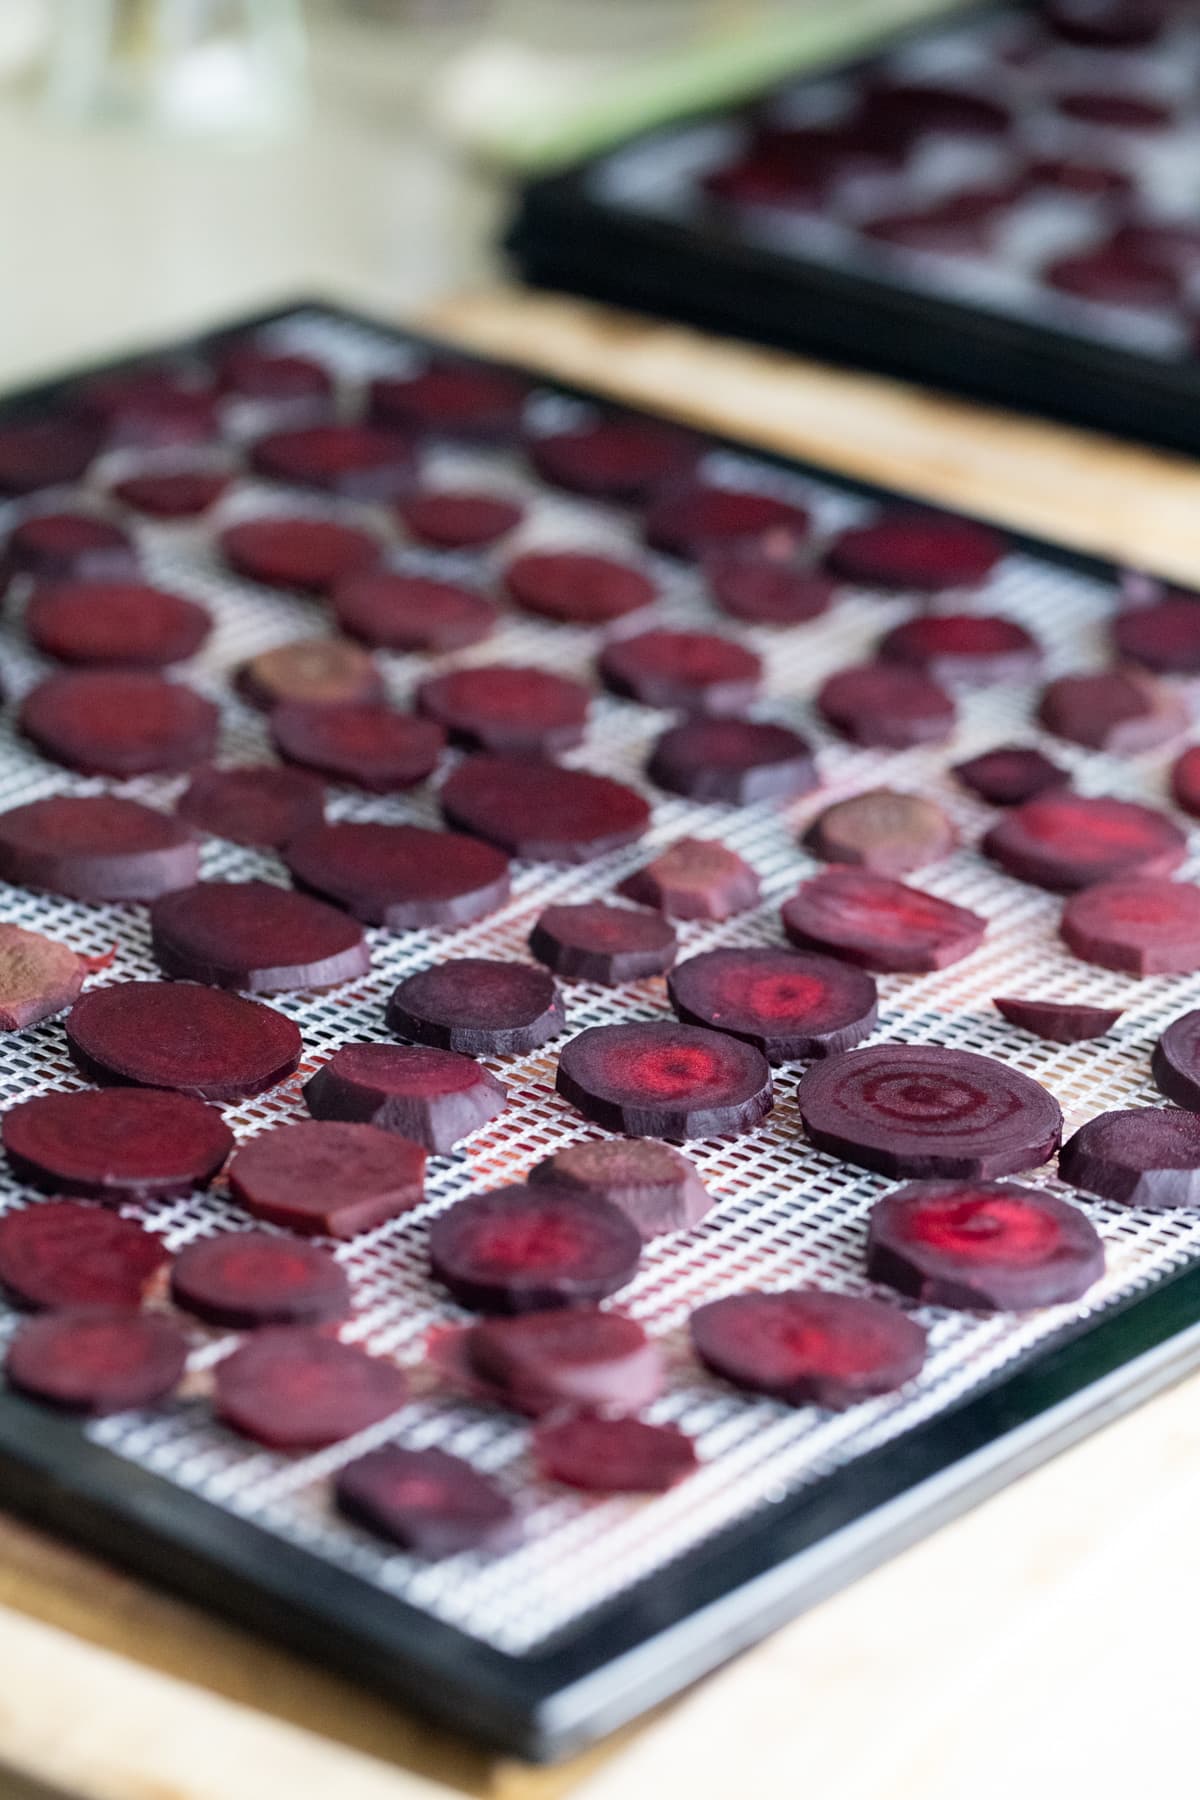 setting the beets on the trays of the dehydrator